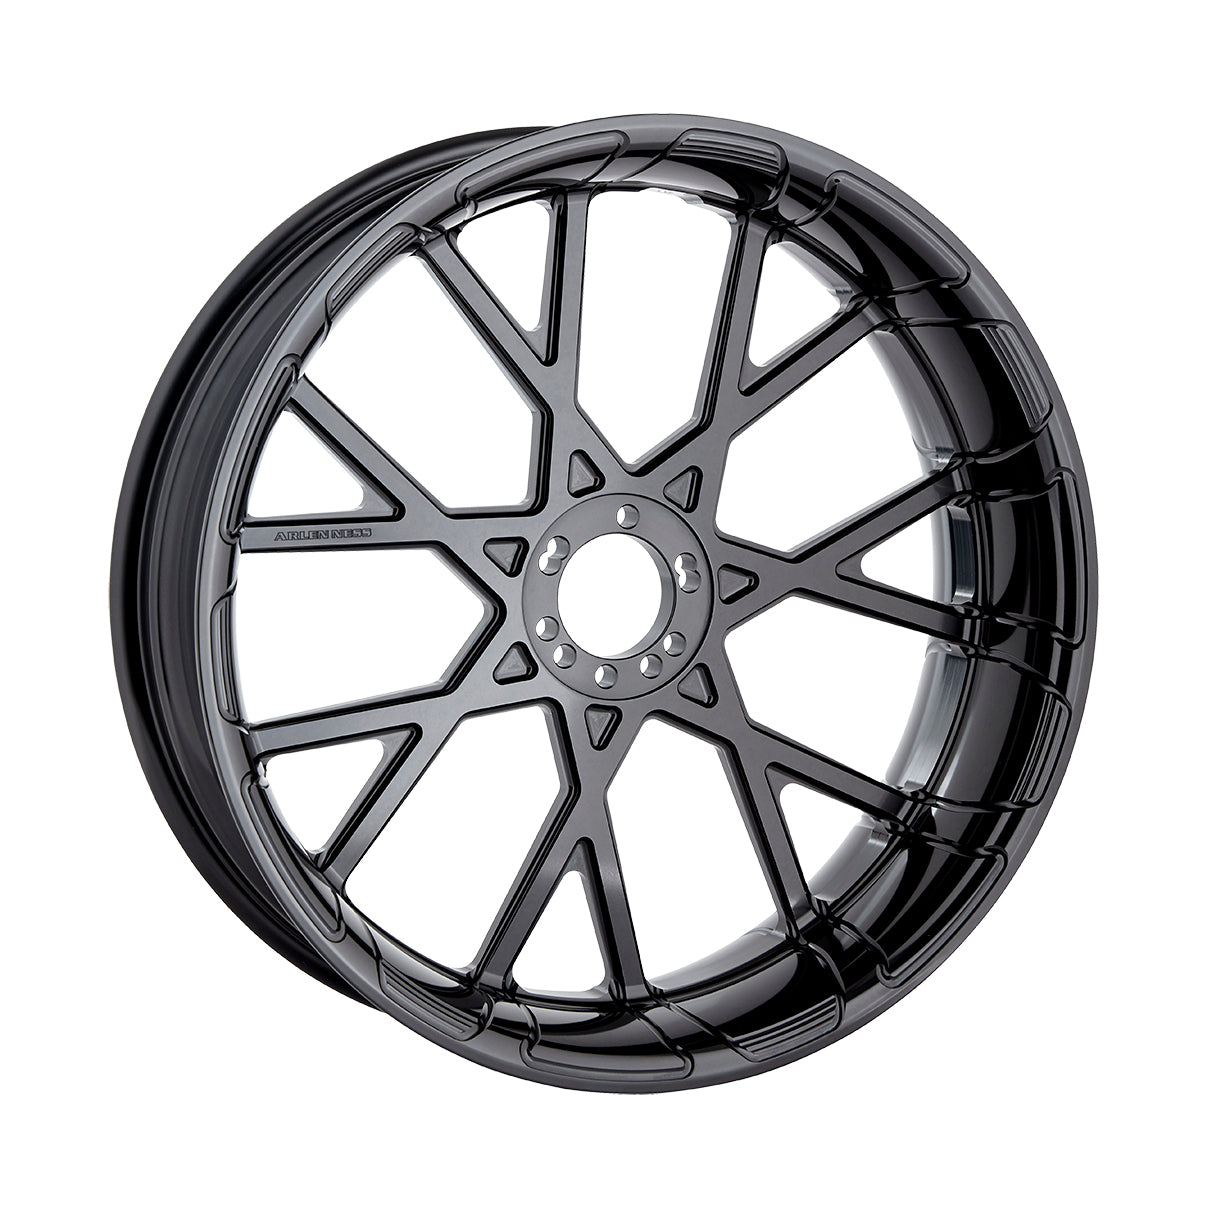 ProCross Forged Wheels, All Black